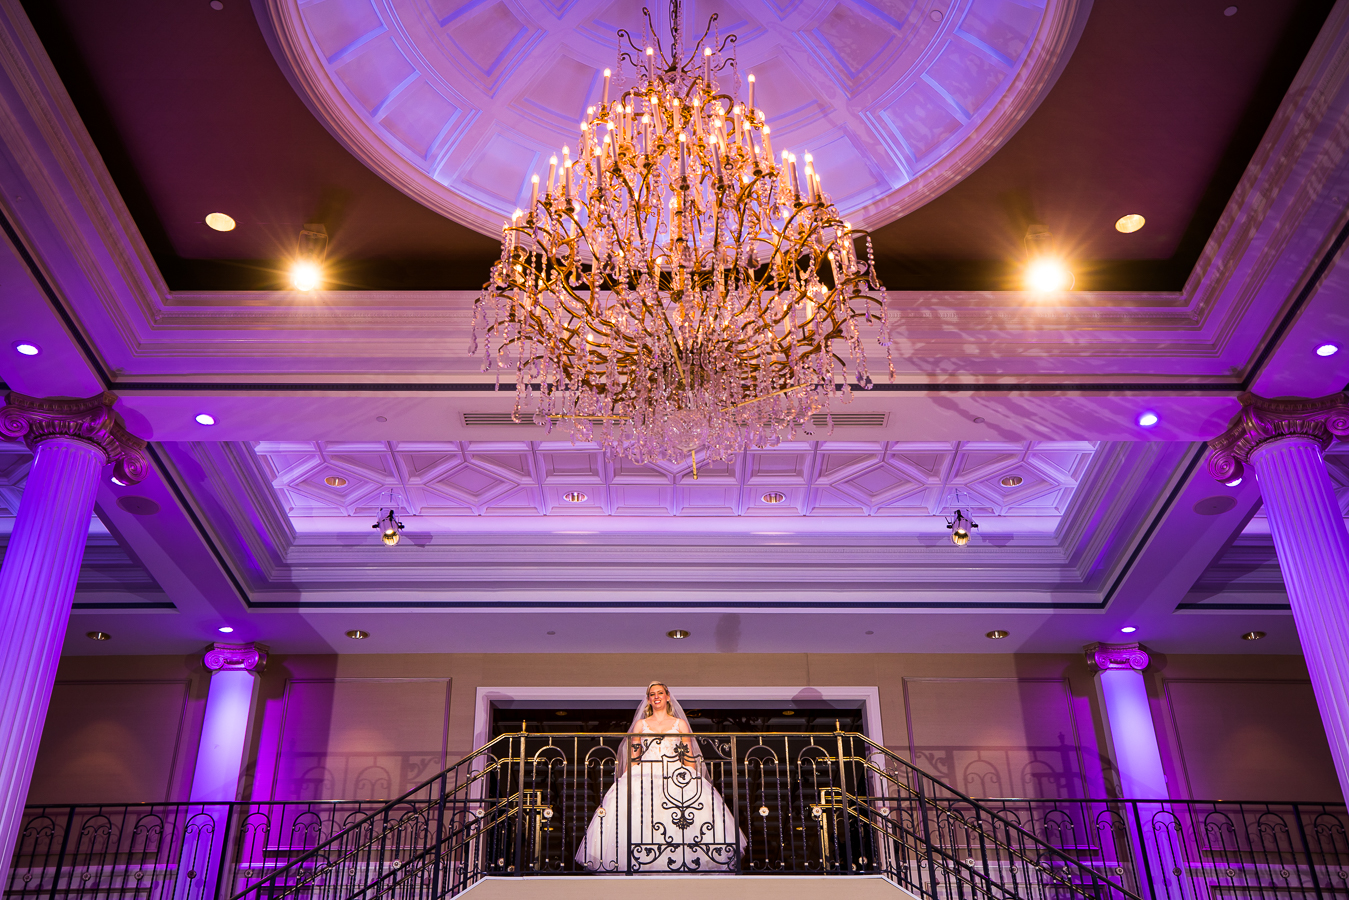 creative NJ Wedding Photographer, lisa rhinehart, captures this stunning, elegant image of the bride as she stands at the top of the grand staircase with a giant chandelier in front of her before walking down to her wedding ceremony at the palace